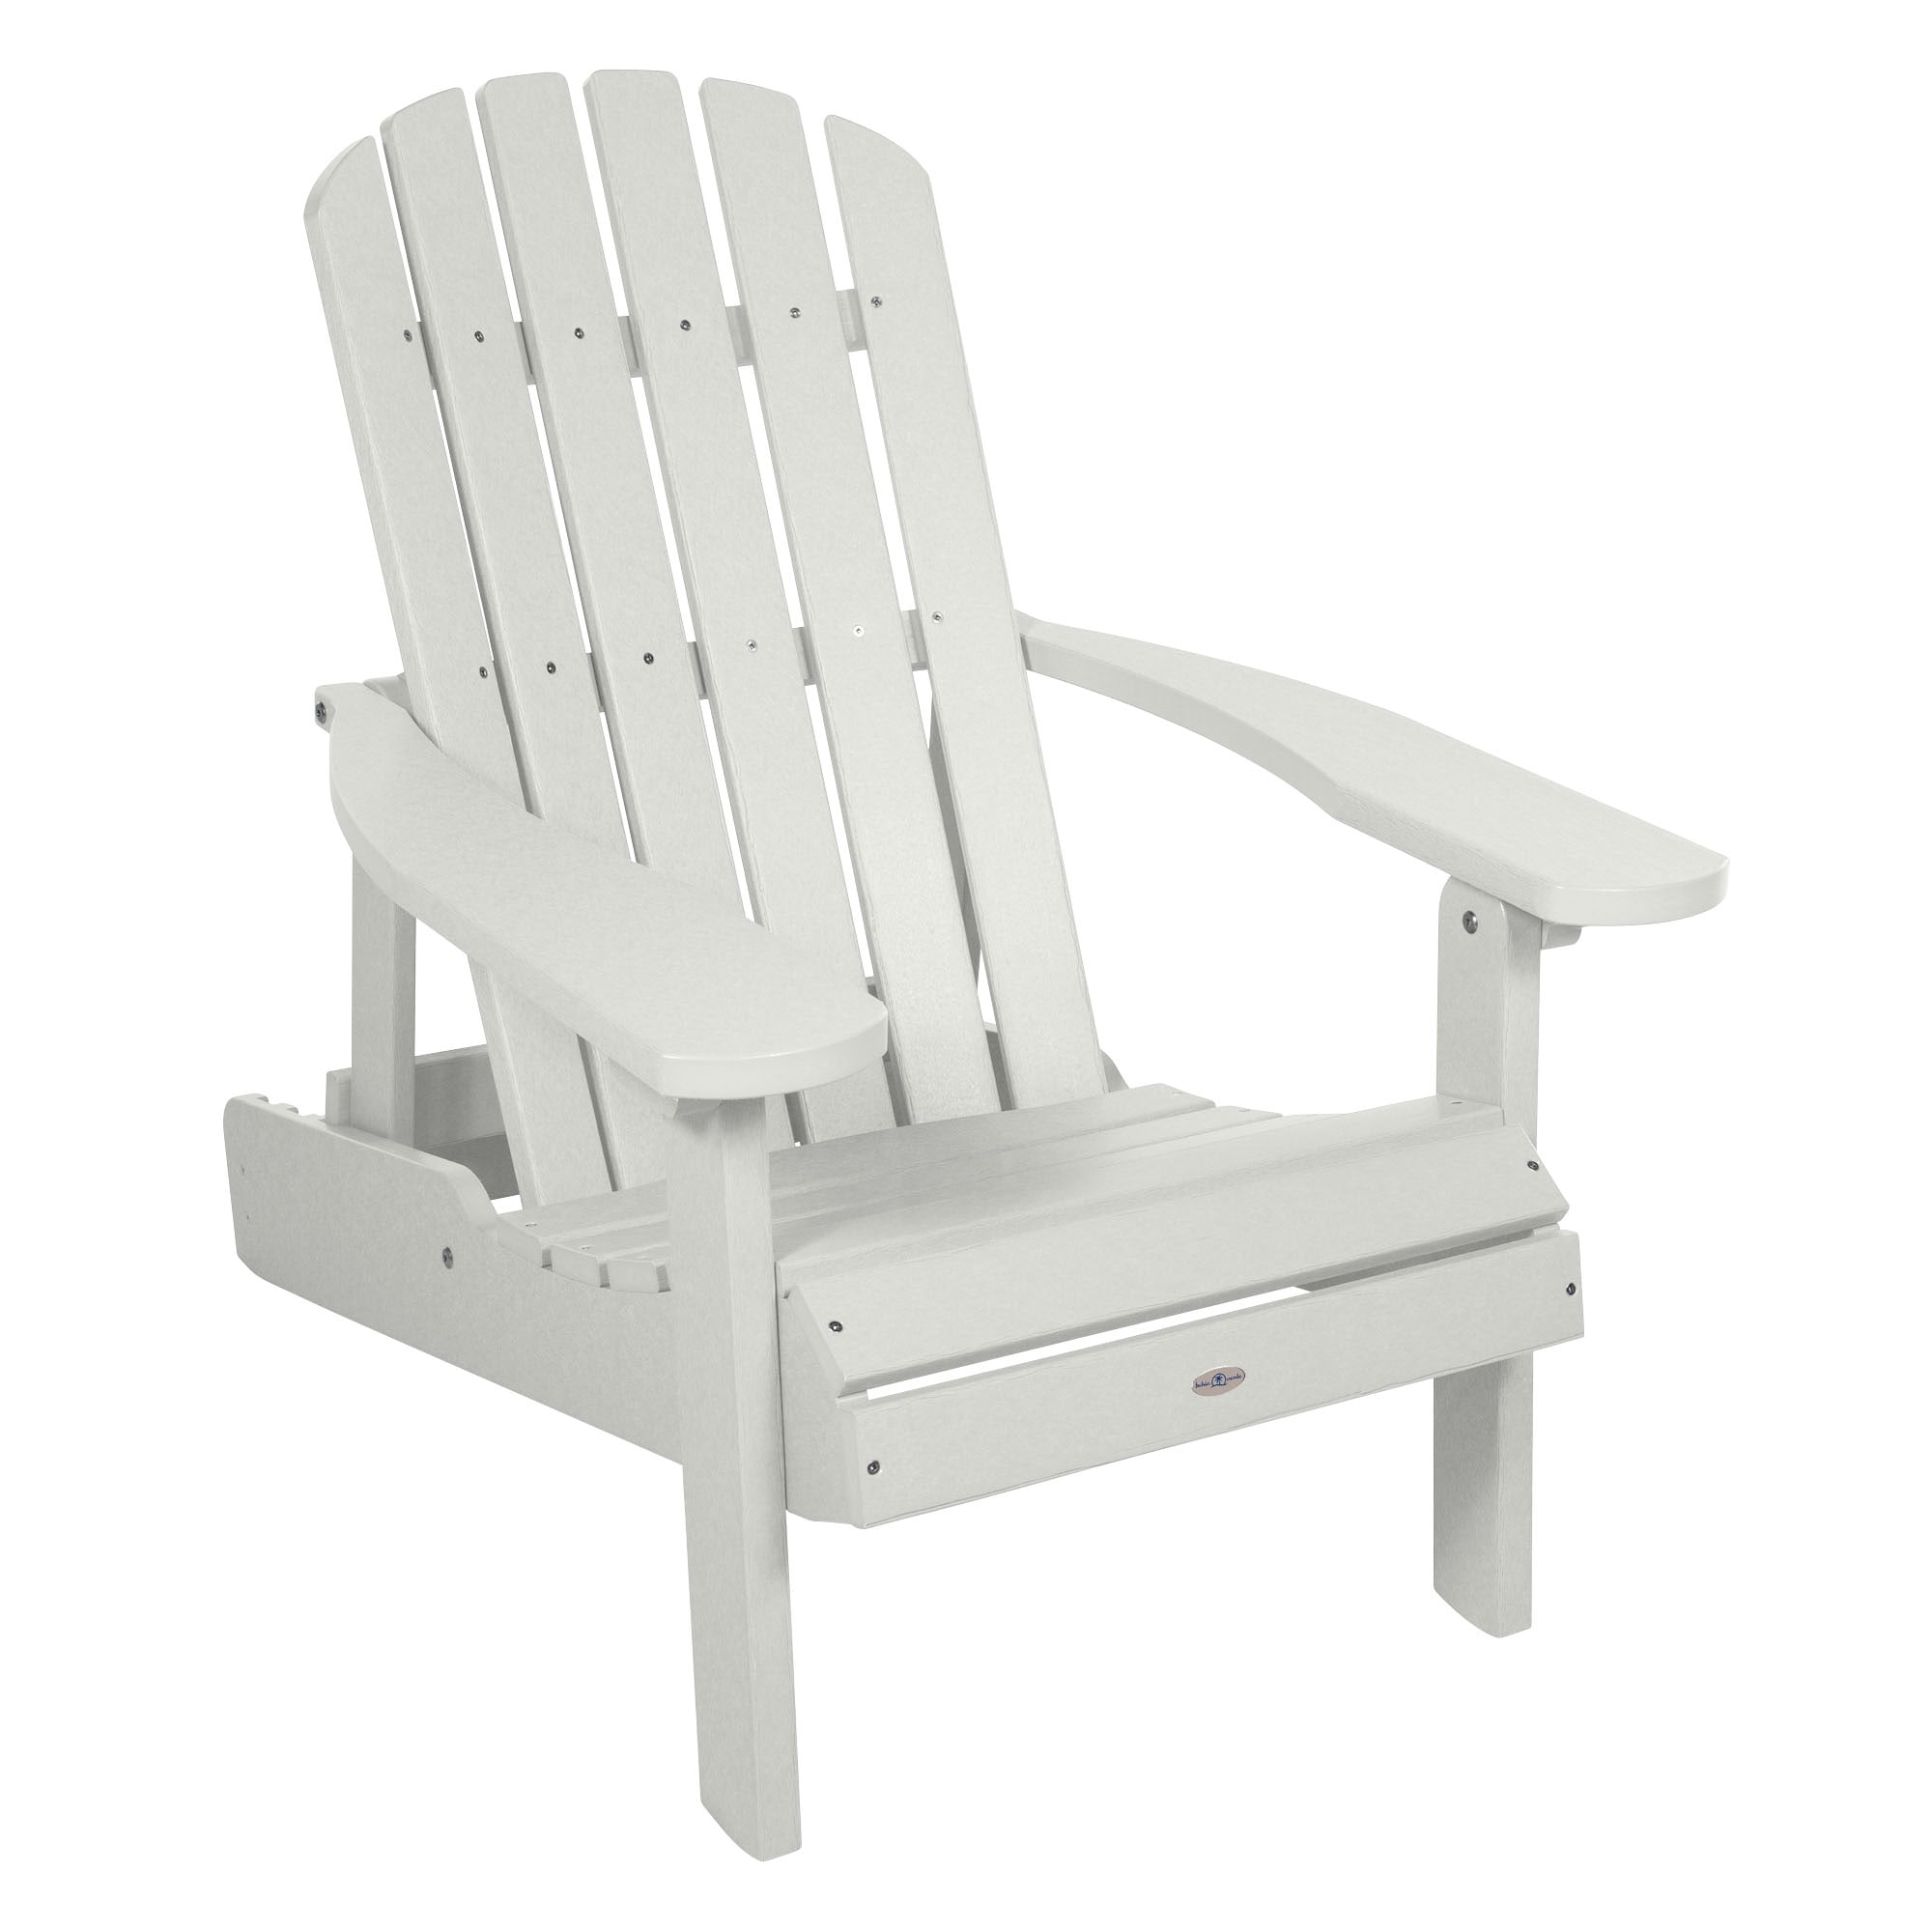 Bahia Verde Outdoors Cape Folding And Reclining Adirondack Chair